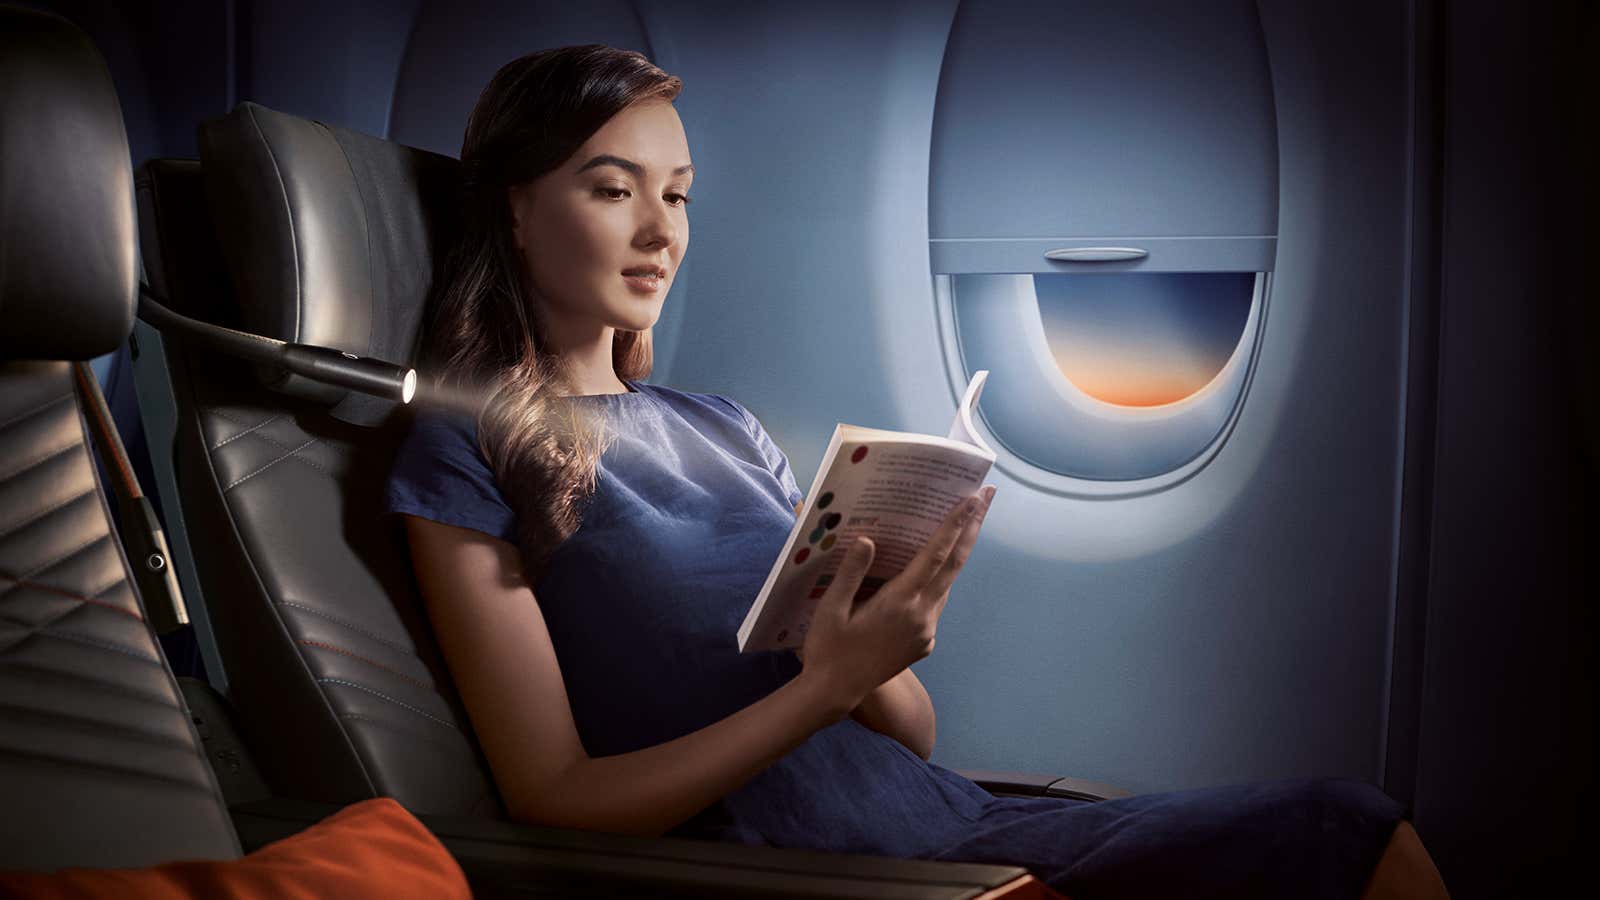 On today’s ultra long-haul flights, passengers can relax in total comfort for upwards of 19 hours.